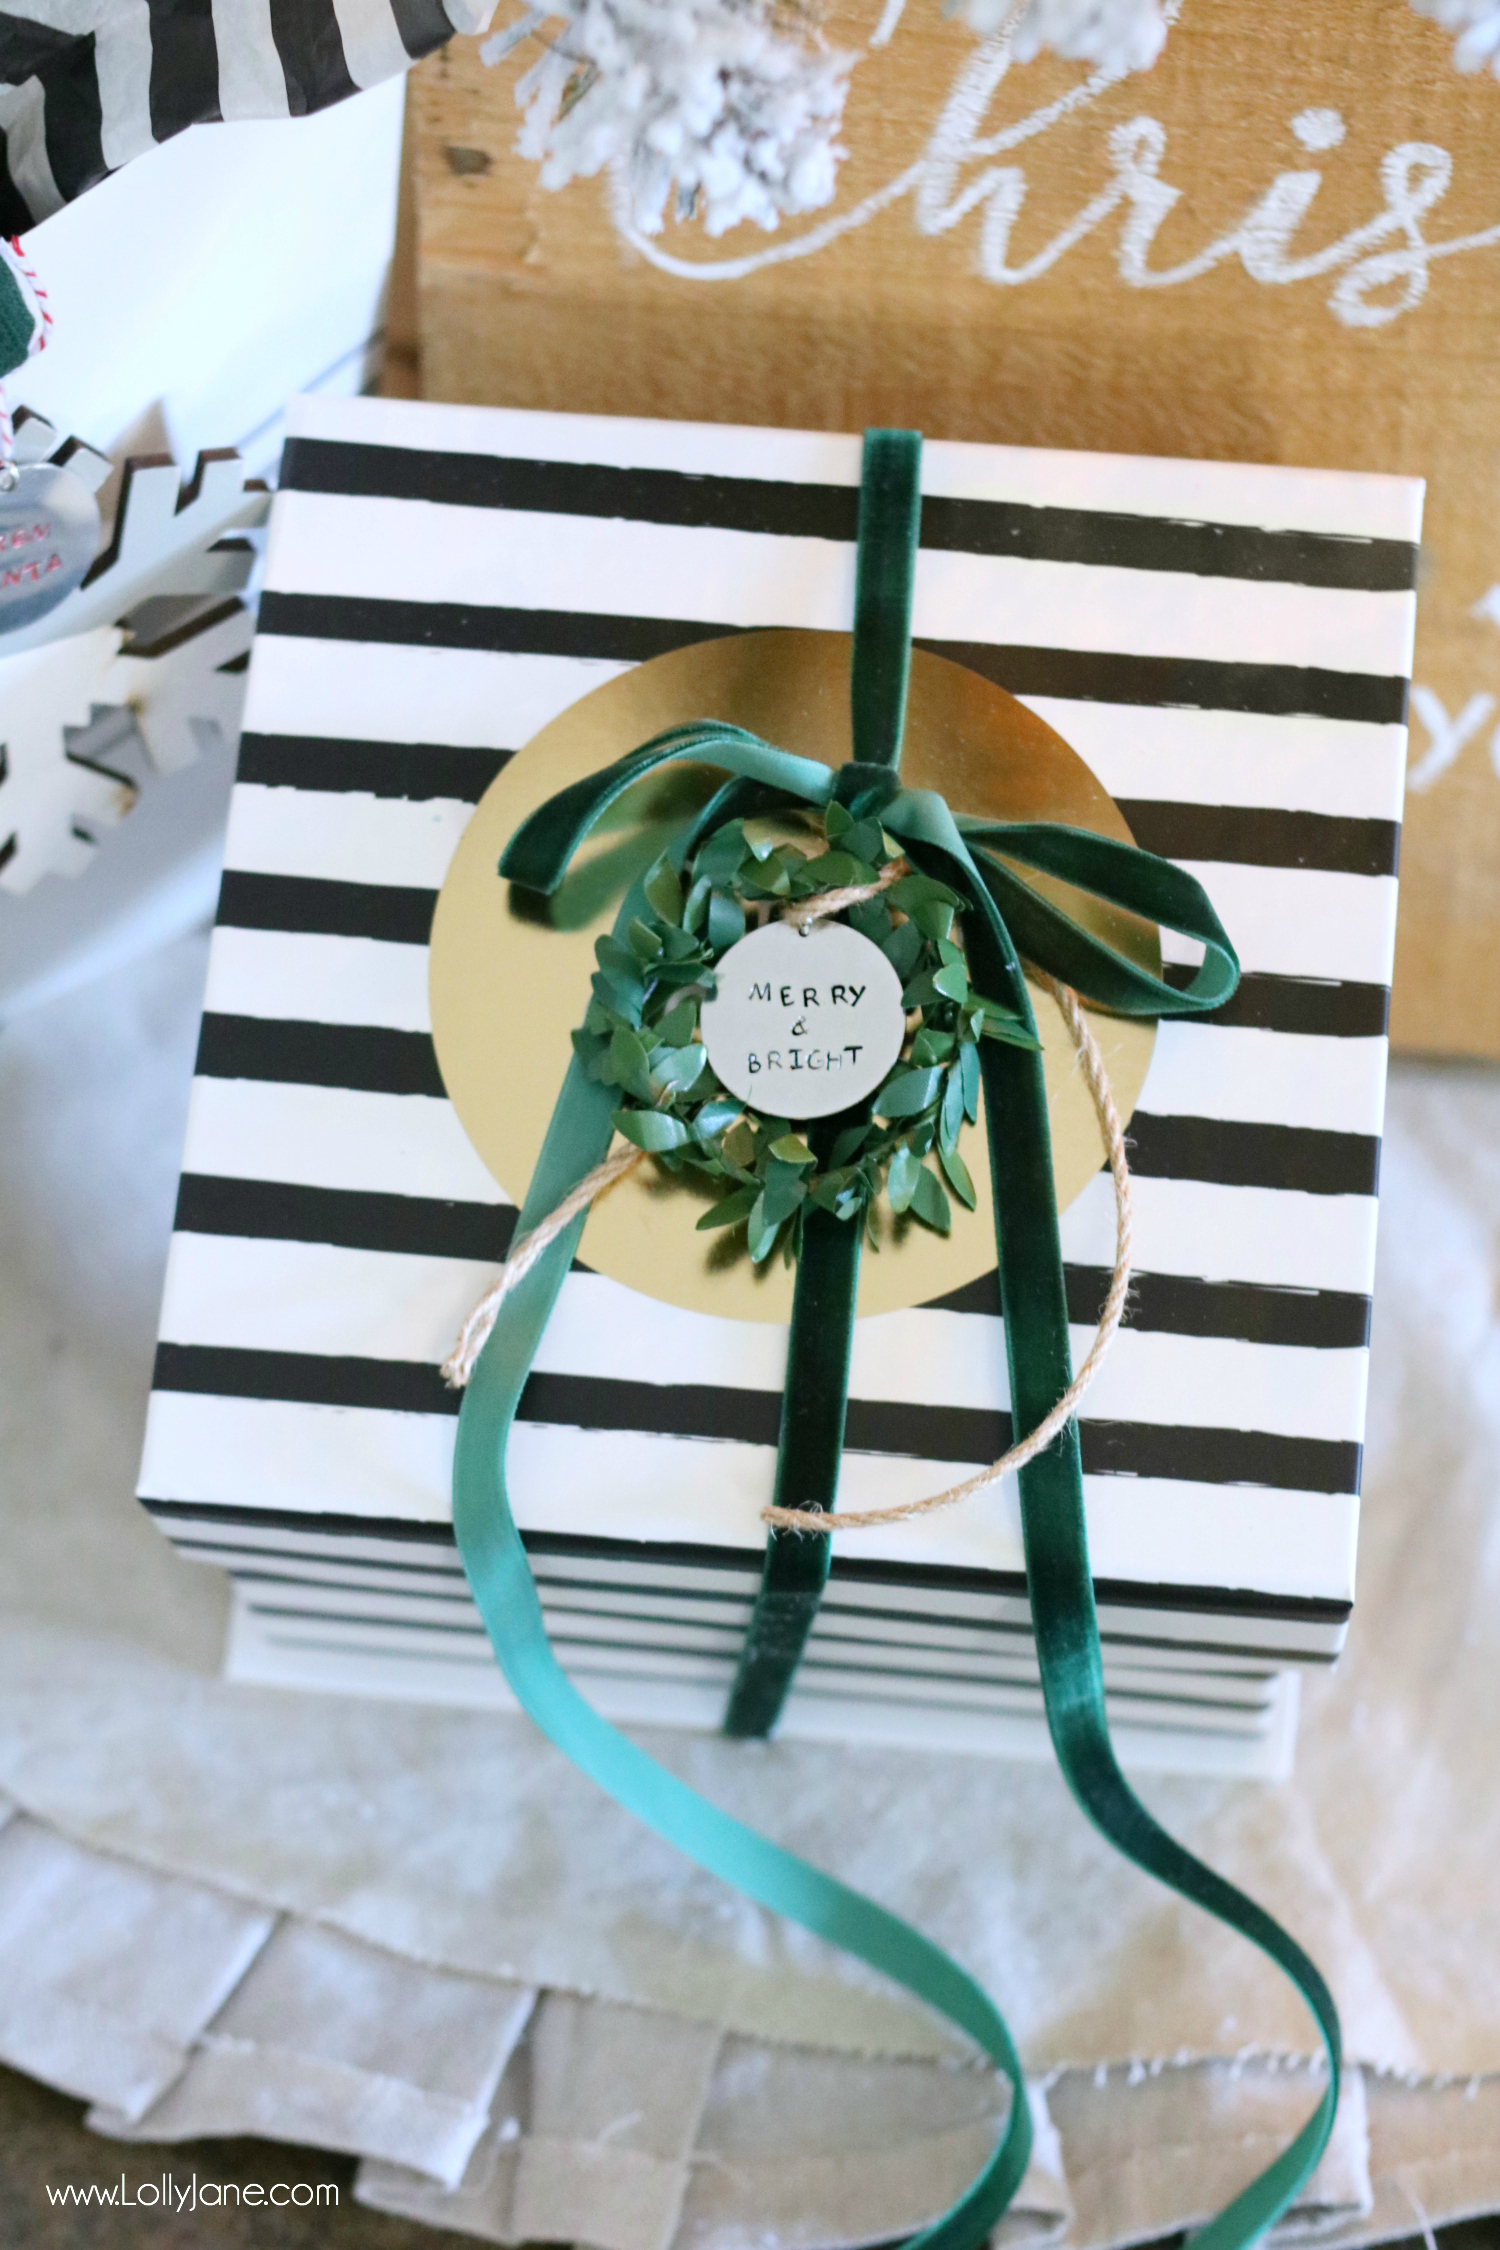 Love this DIY Stamped Metal Tag, perfect to tie onto Christmas or holiday gifts to personalize it. So pretty and EASY to make!